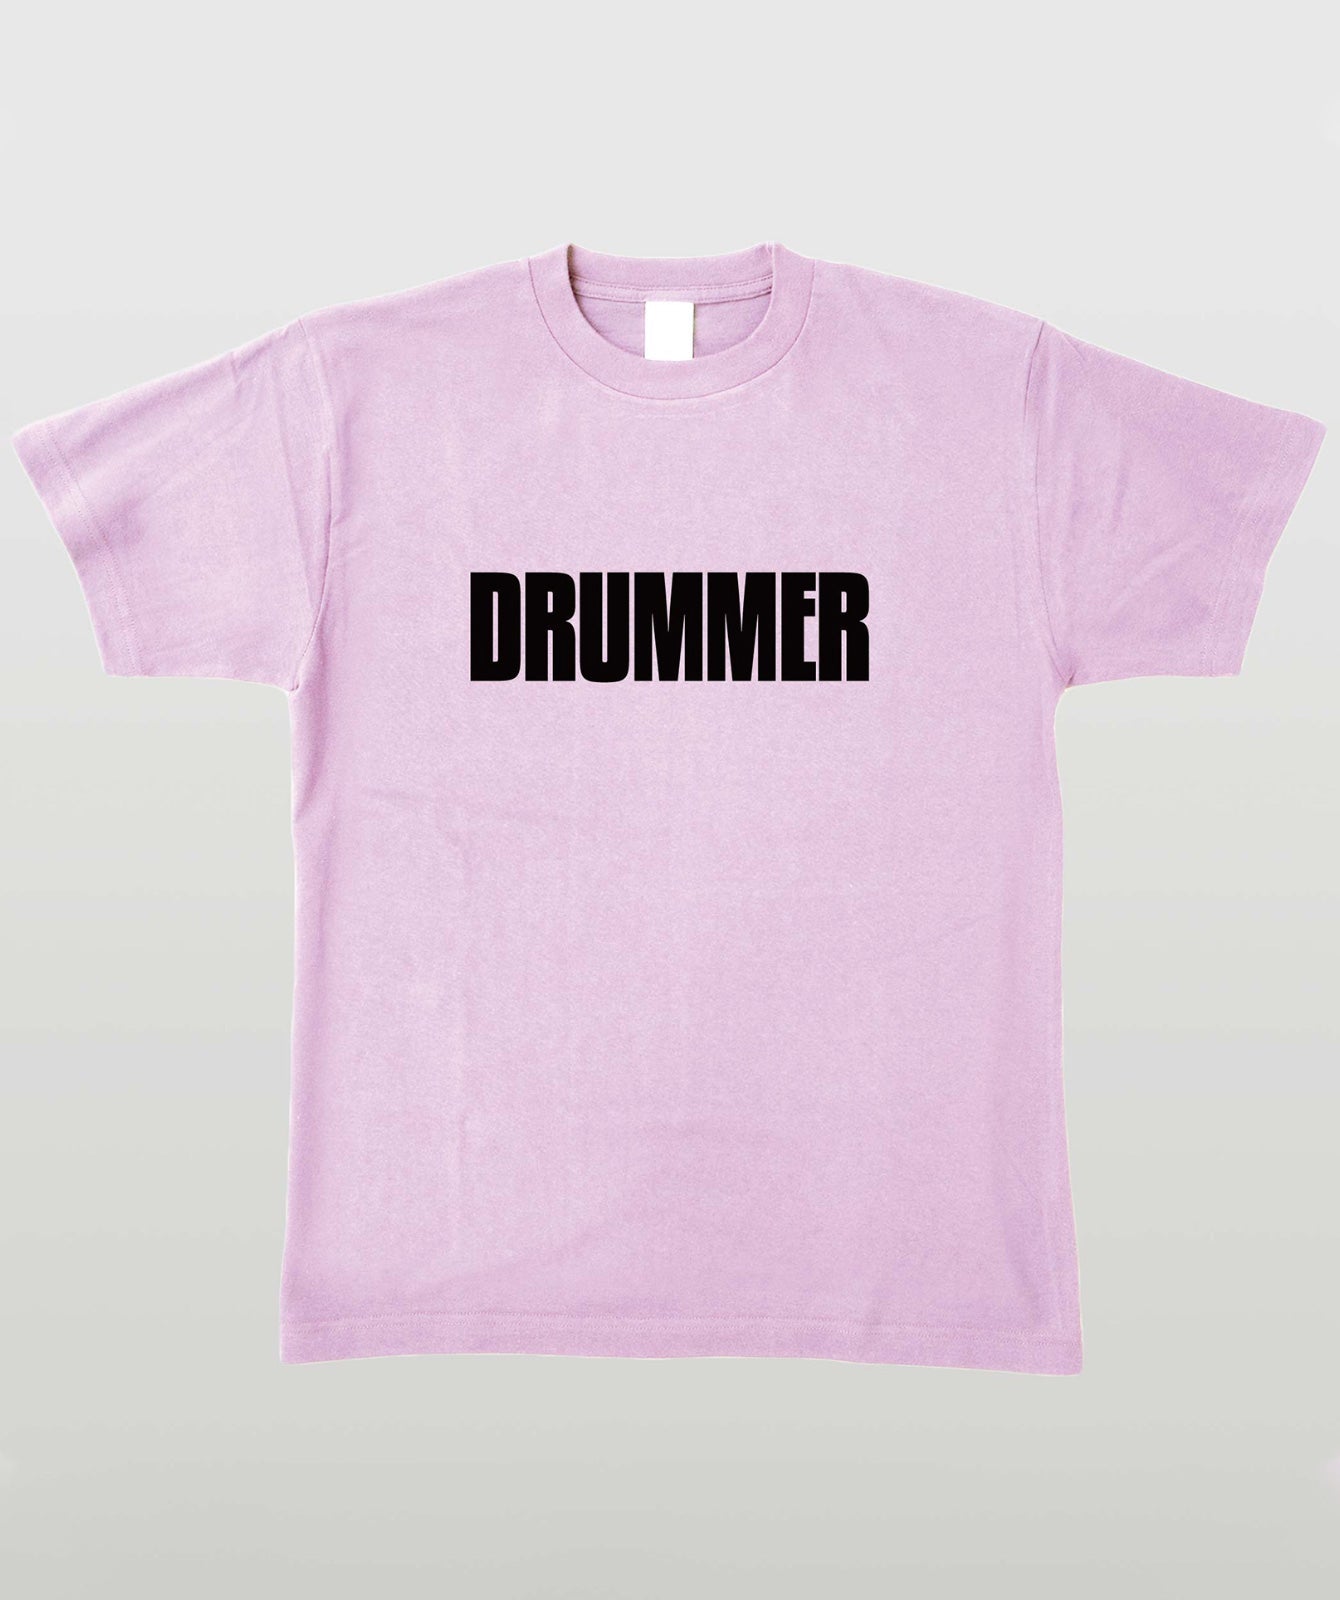 MS PLAYER SERIES ～DRUMMER Type E～